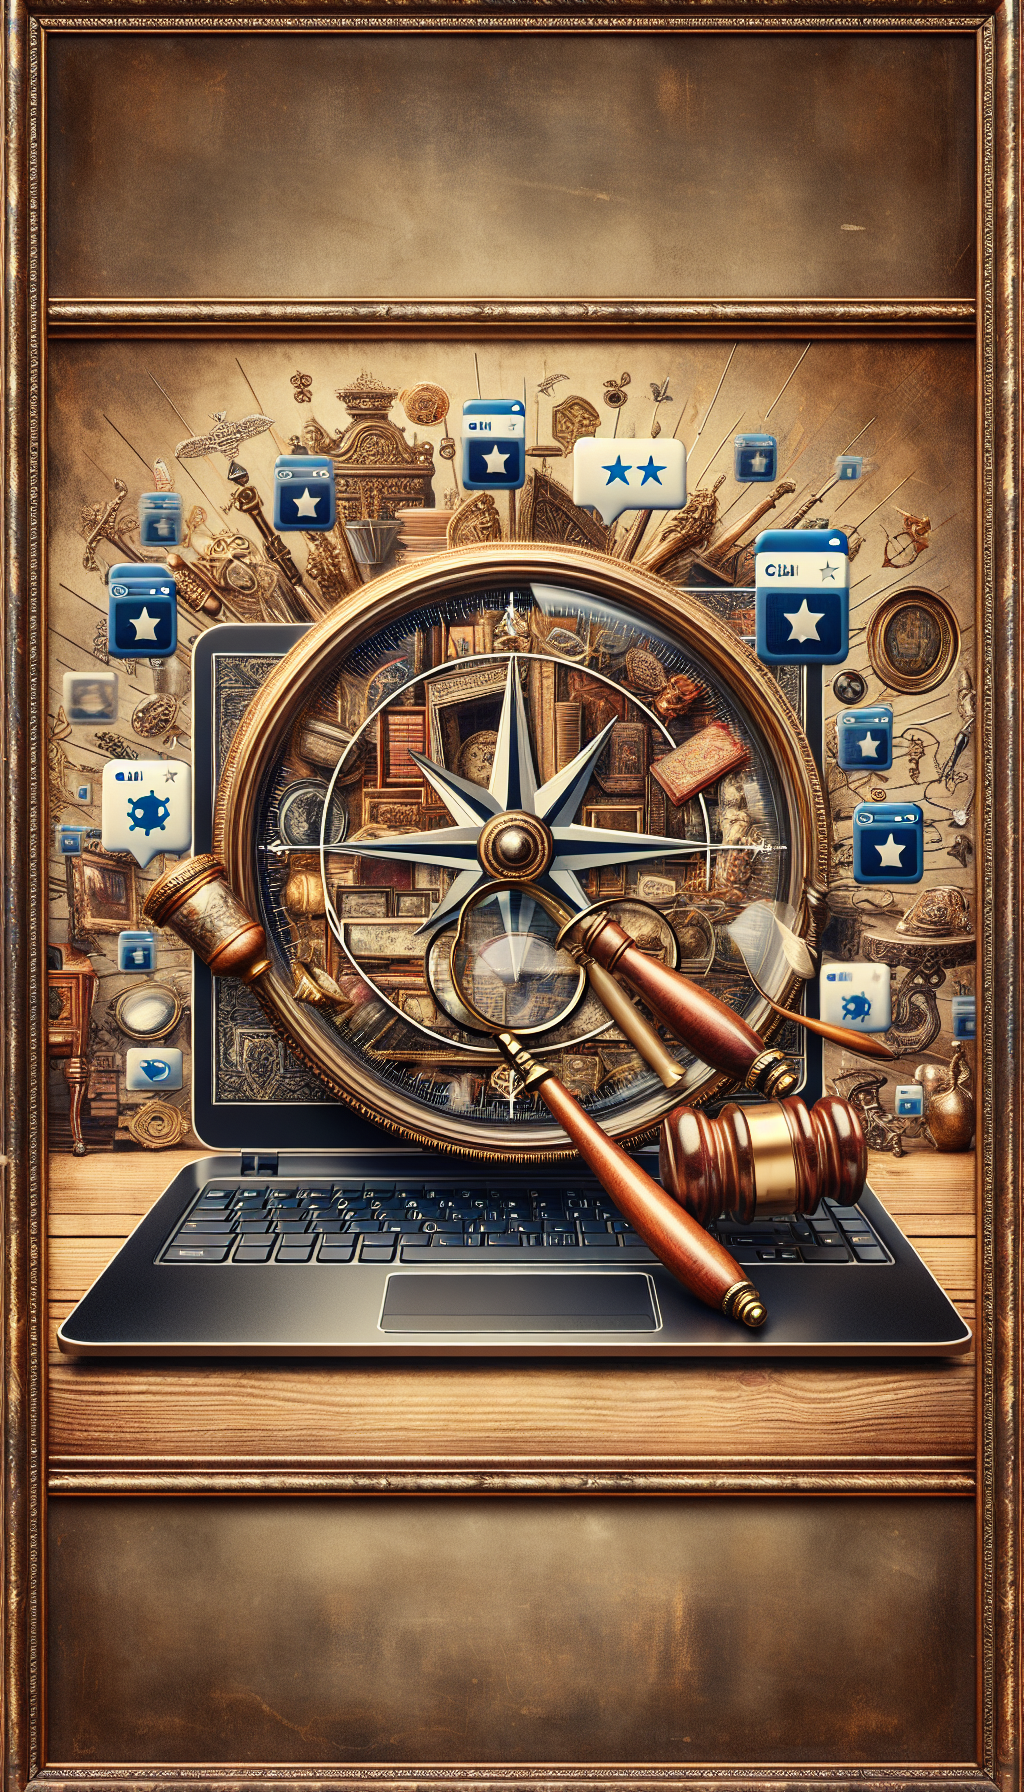 A digital compass rose overlaid on a laptop screen displaying a classic auction gavel, magnifying glass, and a rotating gallery of antiques. The compass points towards different web icons symbolizing reputable appraisal sites, with a chat bubble showing a five-star review floating nearby. The entire image is framed within a vintage ornate picture frame to emphasize the antique theme.